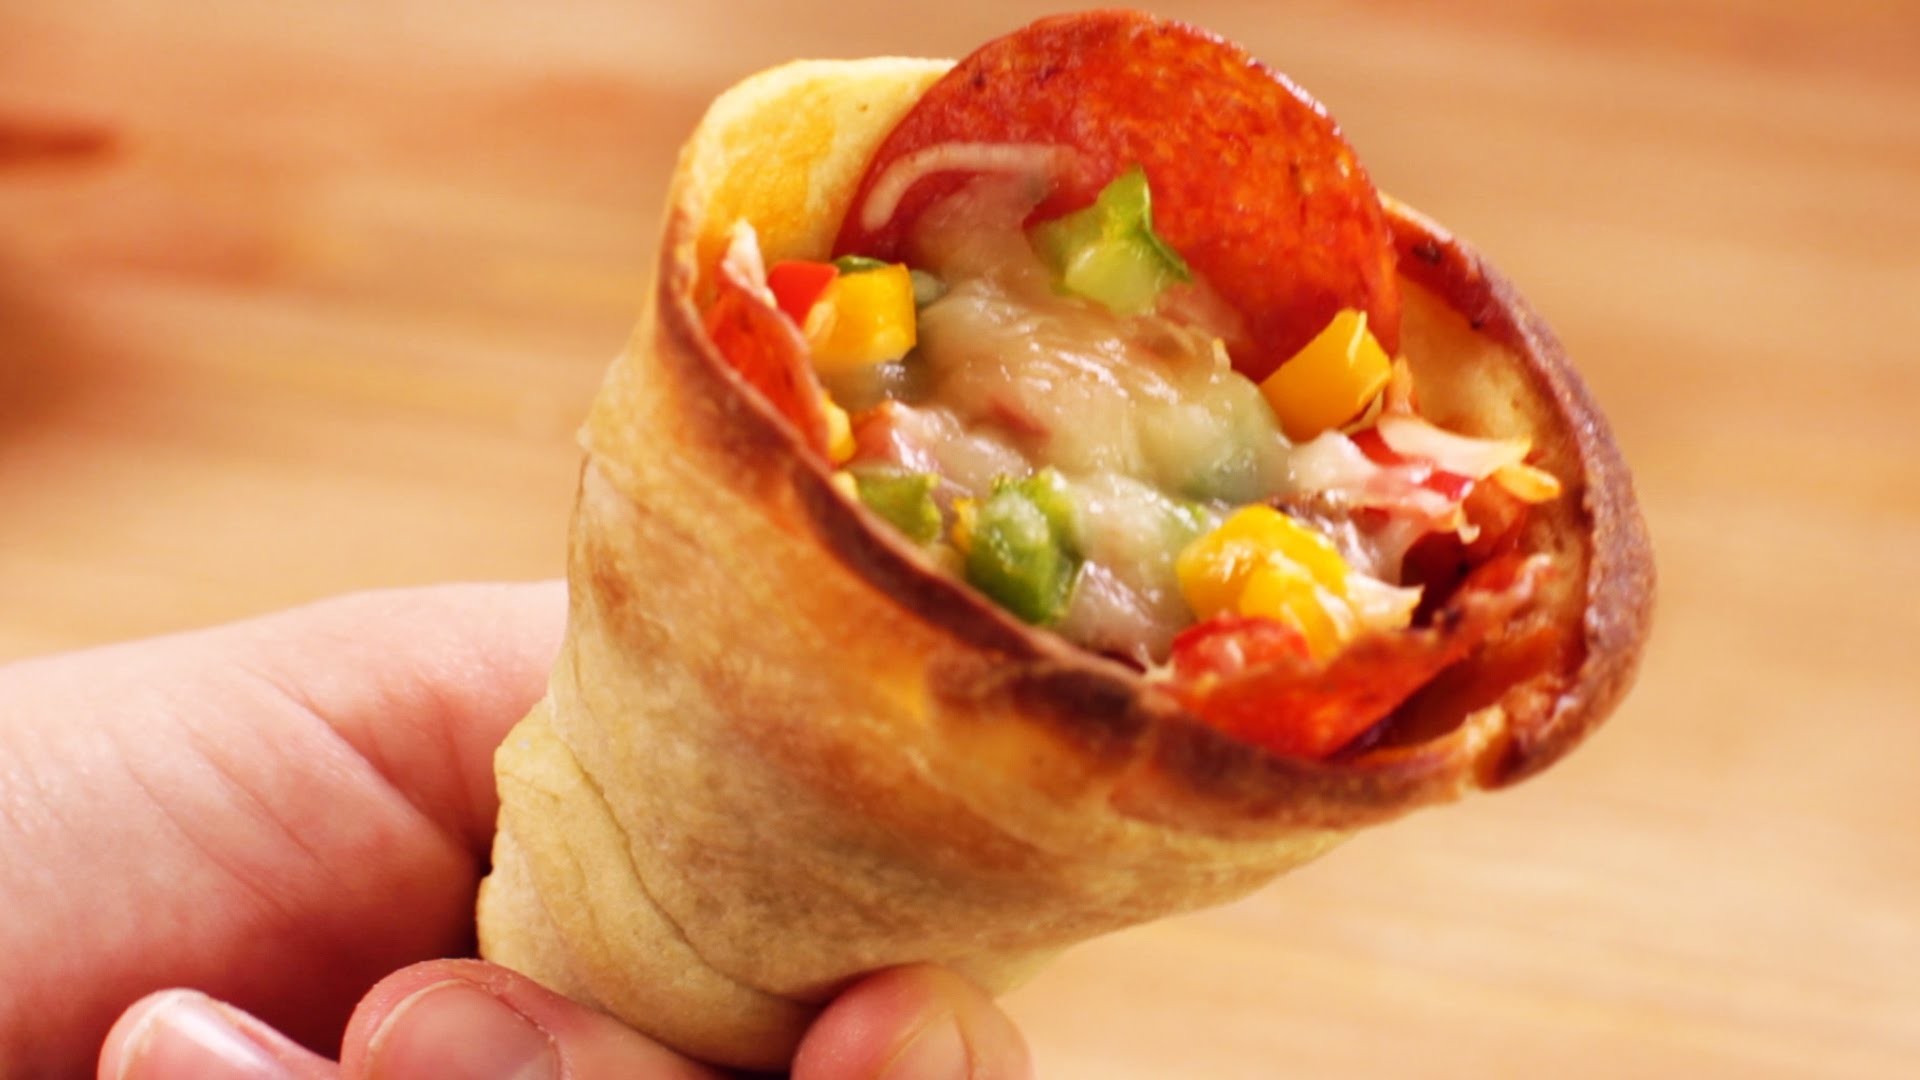 How To Make Pizza Cones